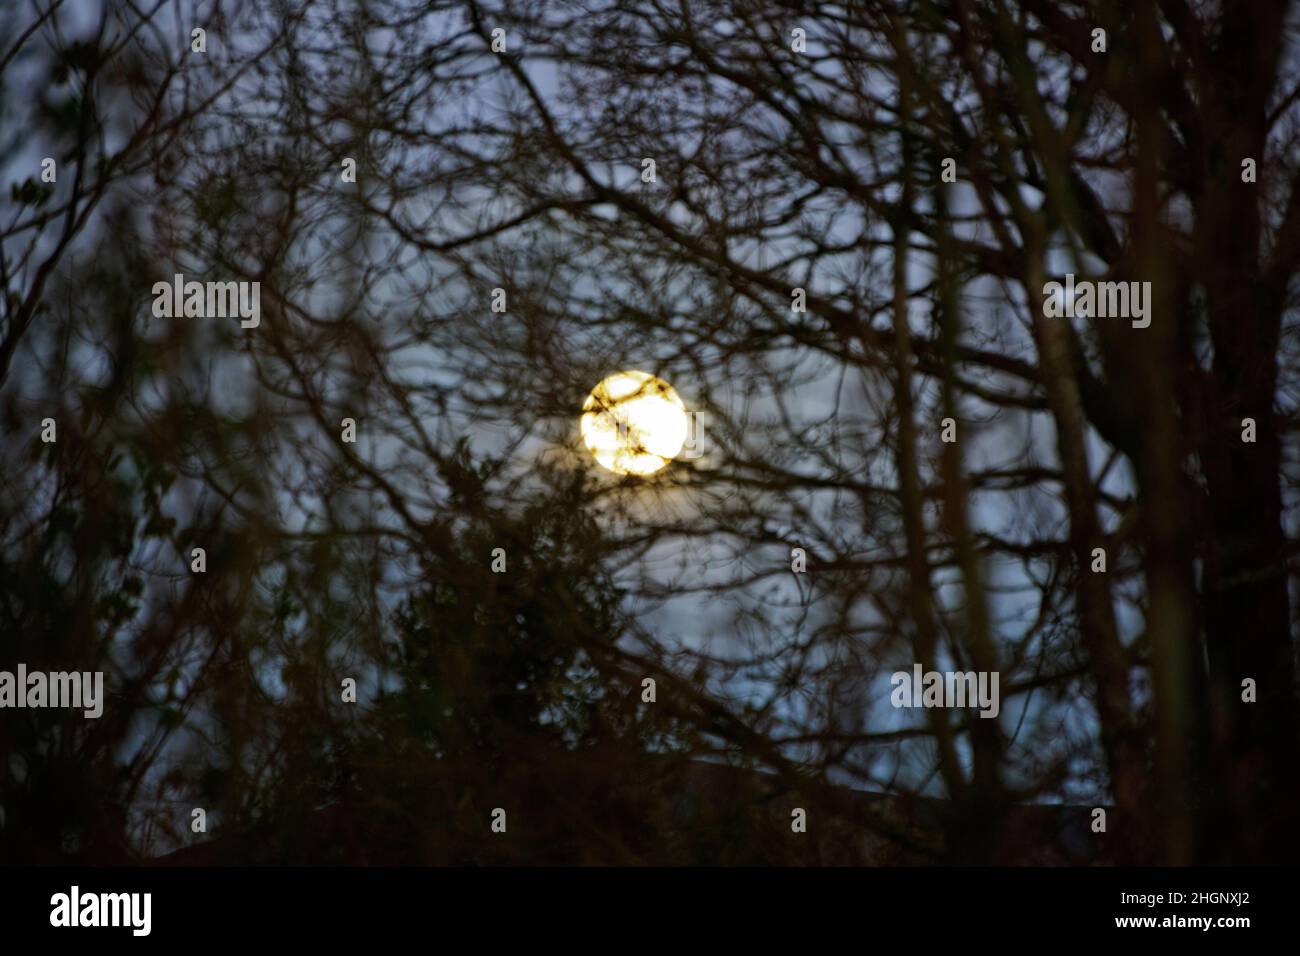 Spring Equinox full moon seen rising through bare tree branches. North Wales Stock Photo